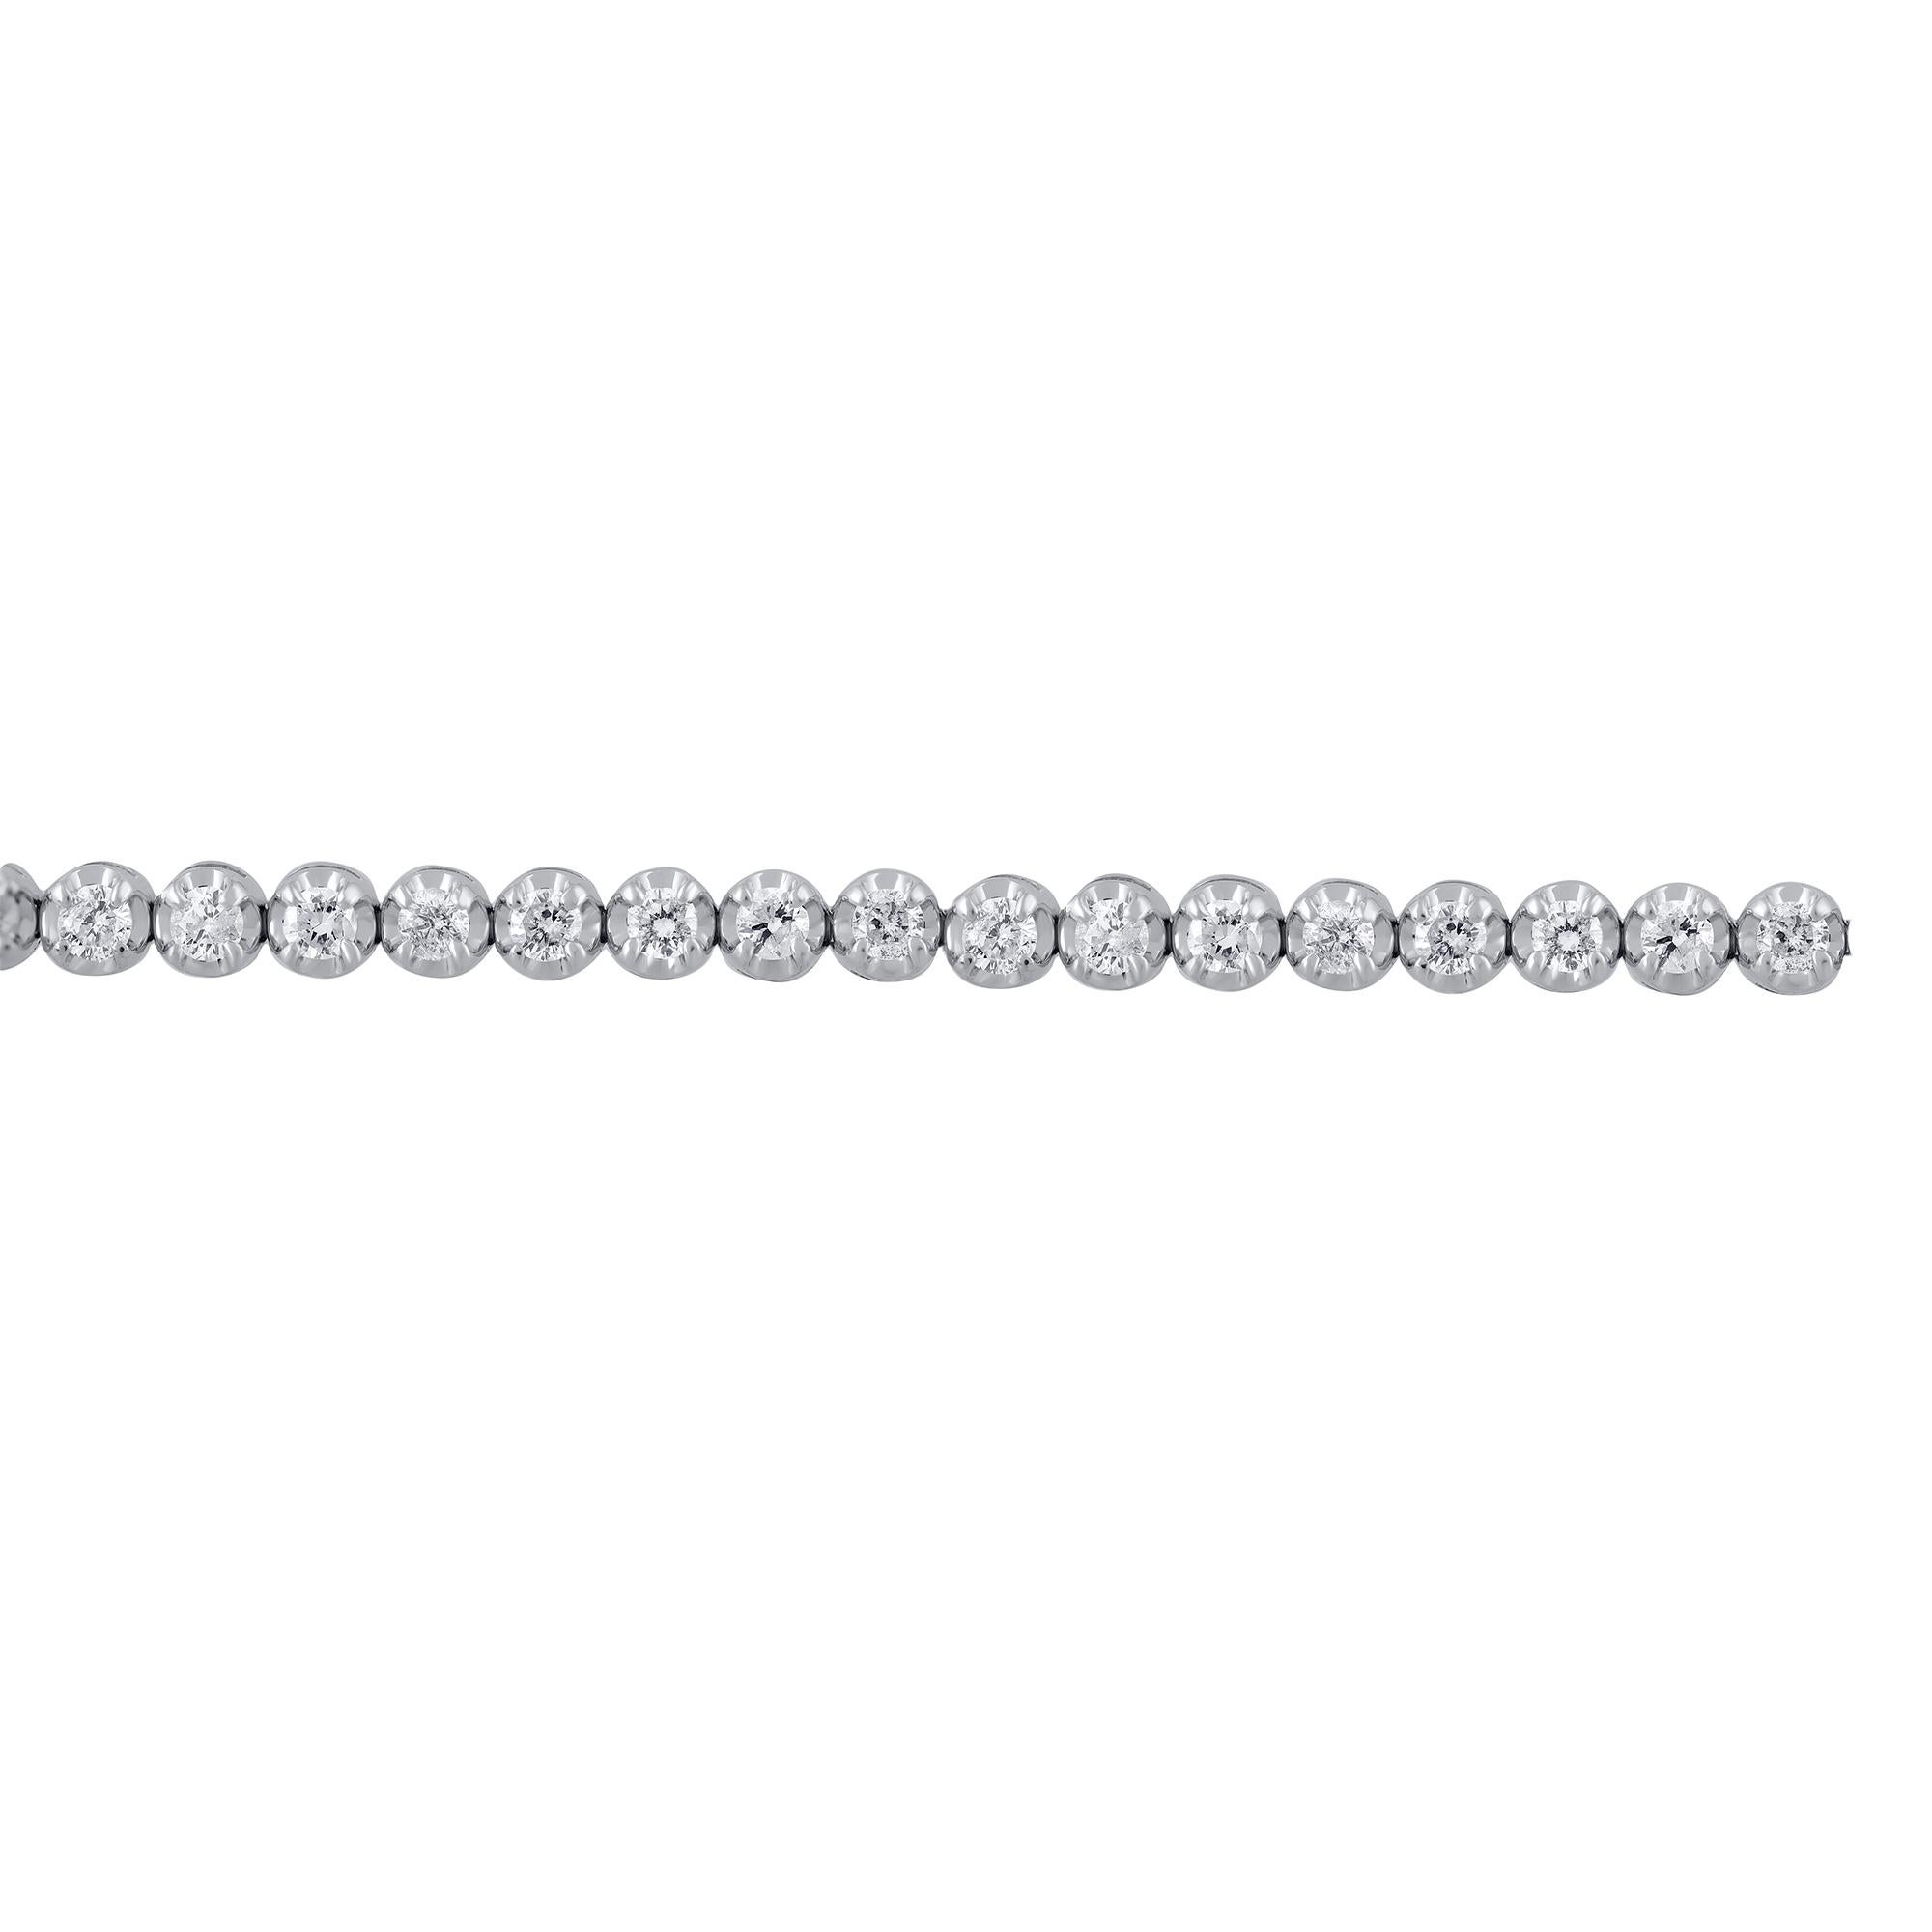 This stunning tennis bracelet is perfect for everyday wear. It is studded with 62 brilliant cut diamonds in crown prong setting and crafted in 14 karat white gold. Diamond are graded H-I Color, I2 Clarity. Bracelet secures firmly with a box clasp.